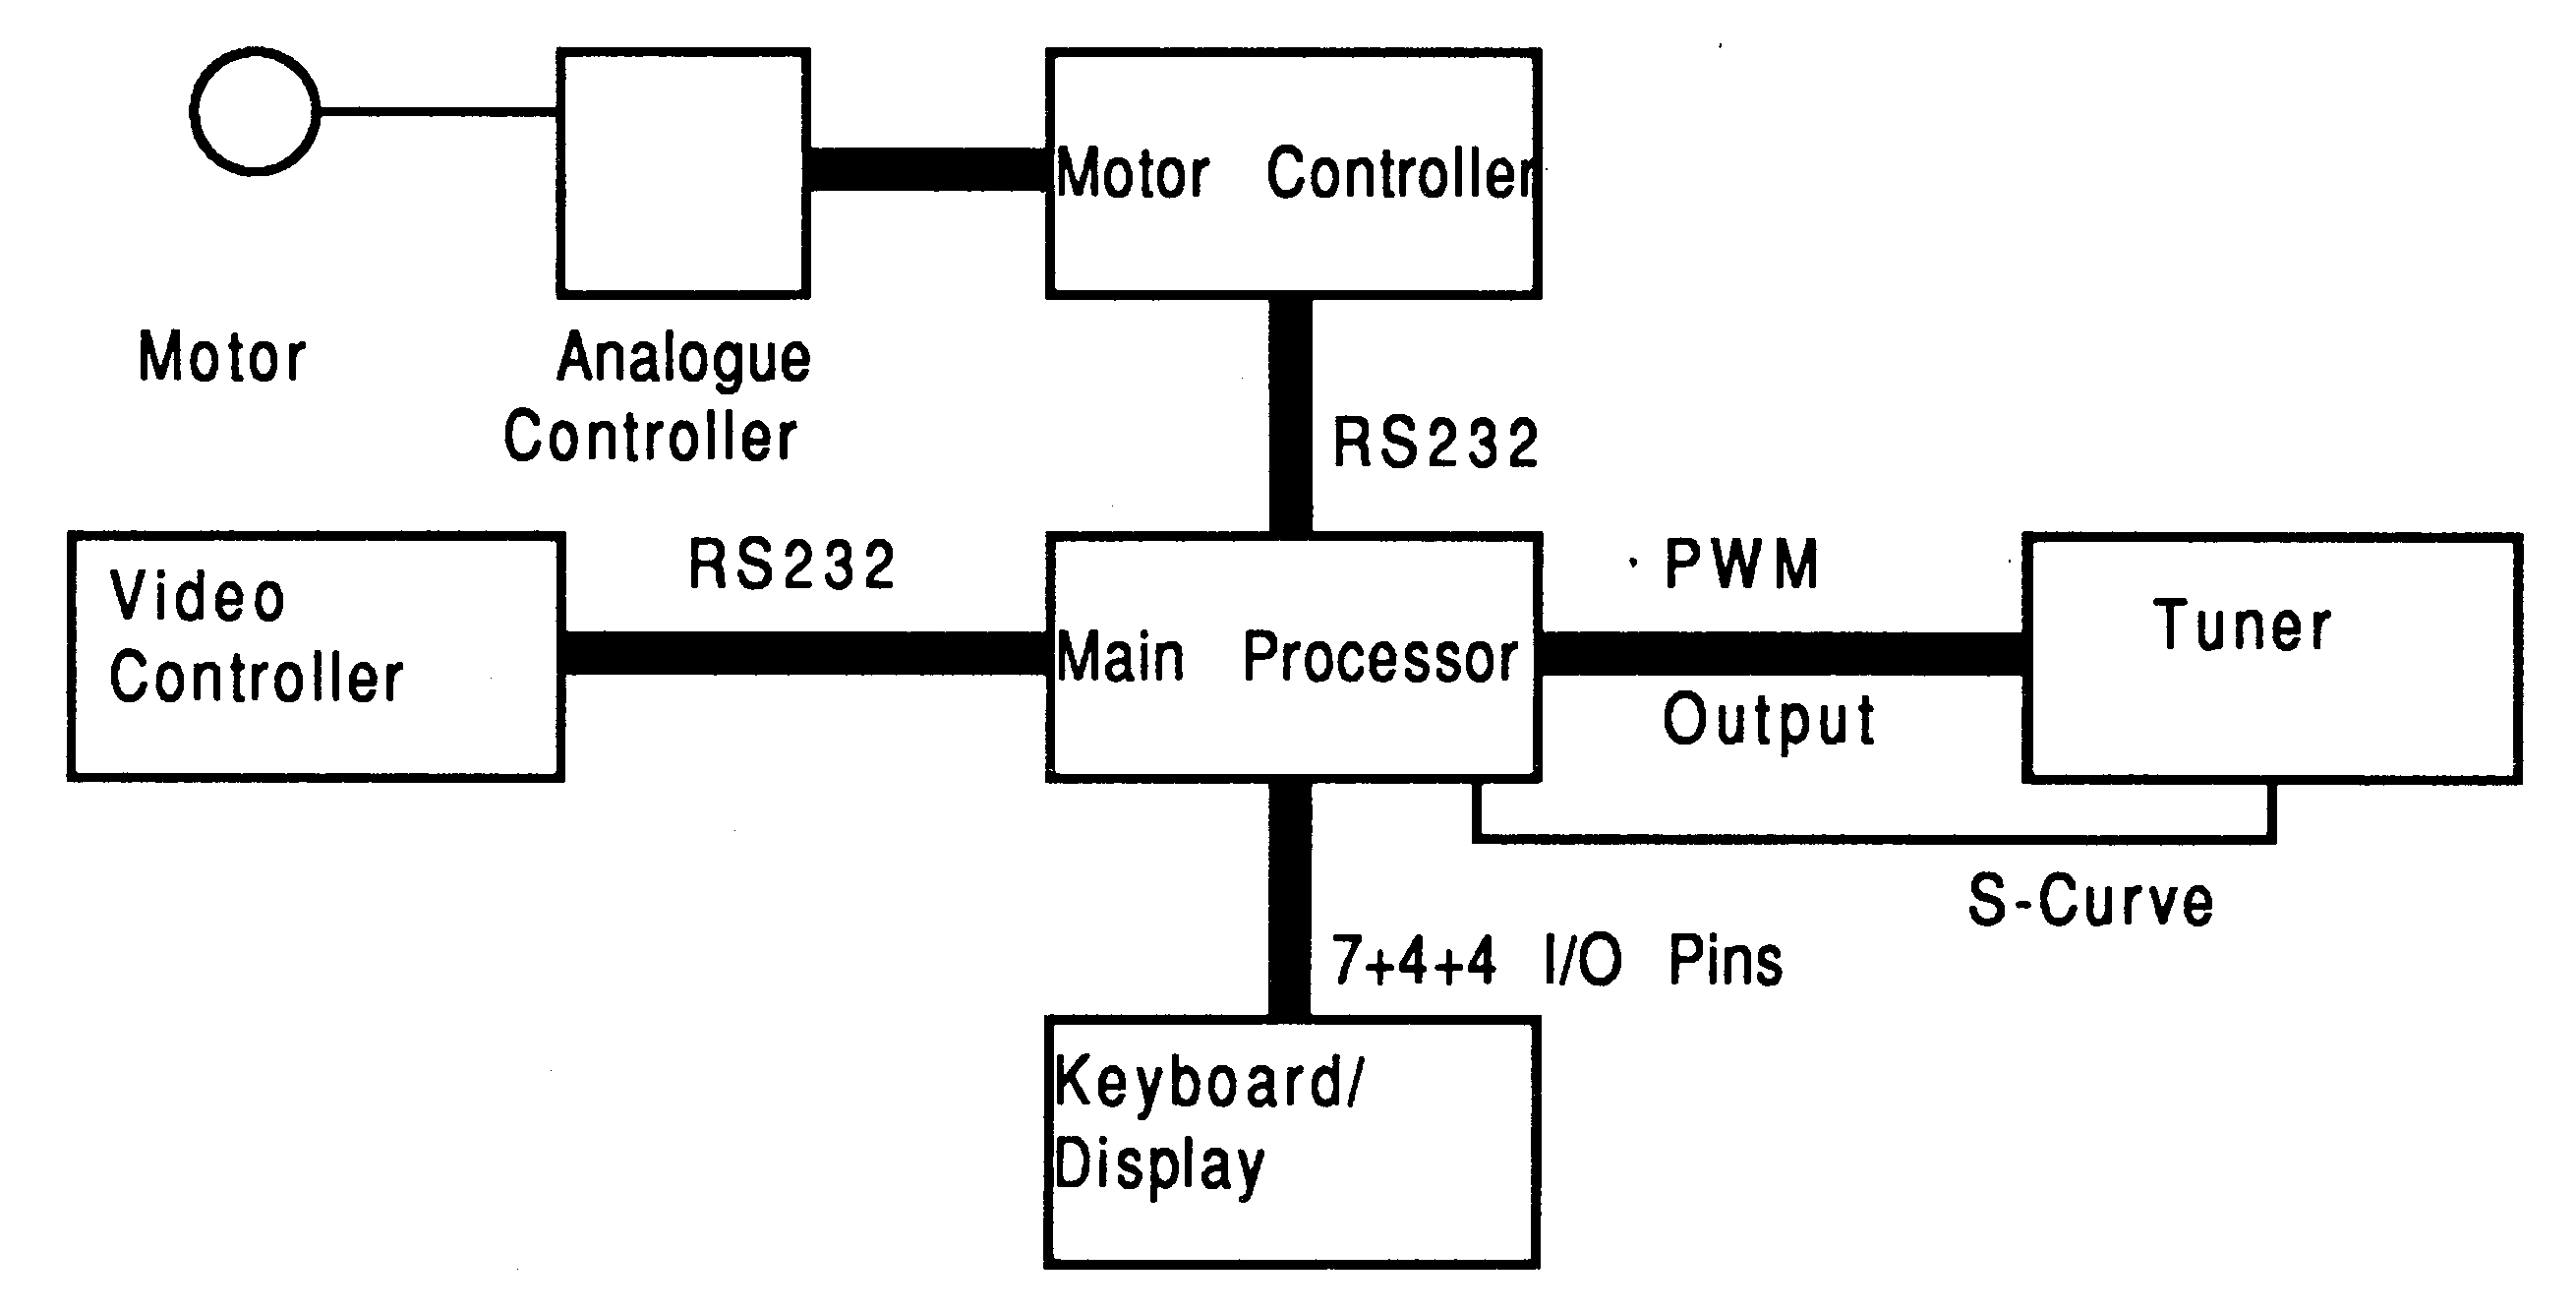 Old VCR architecture